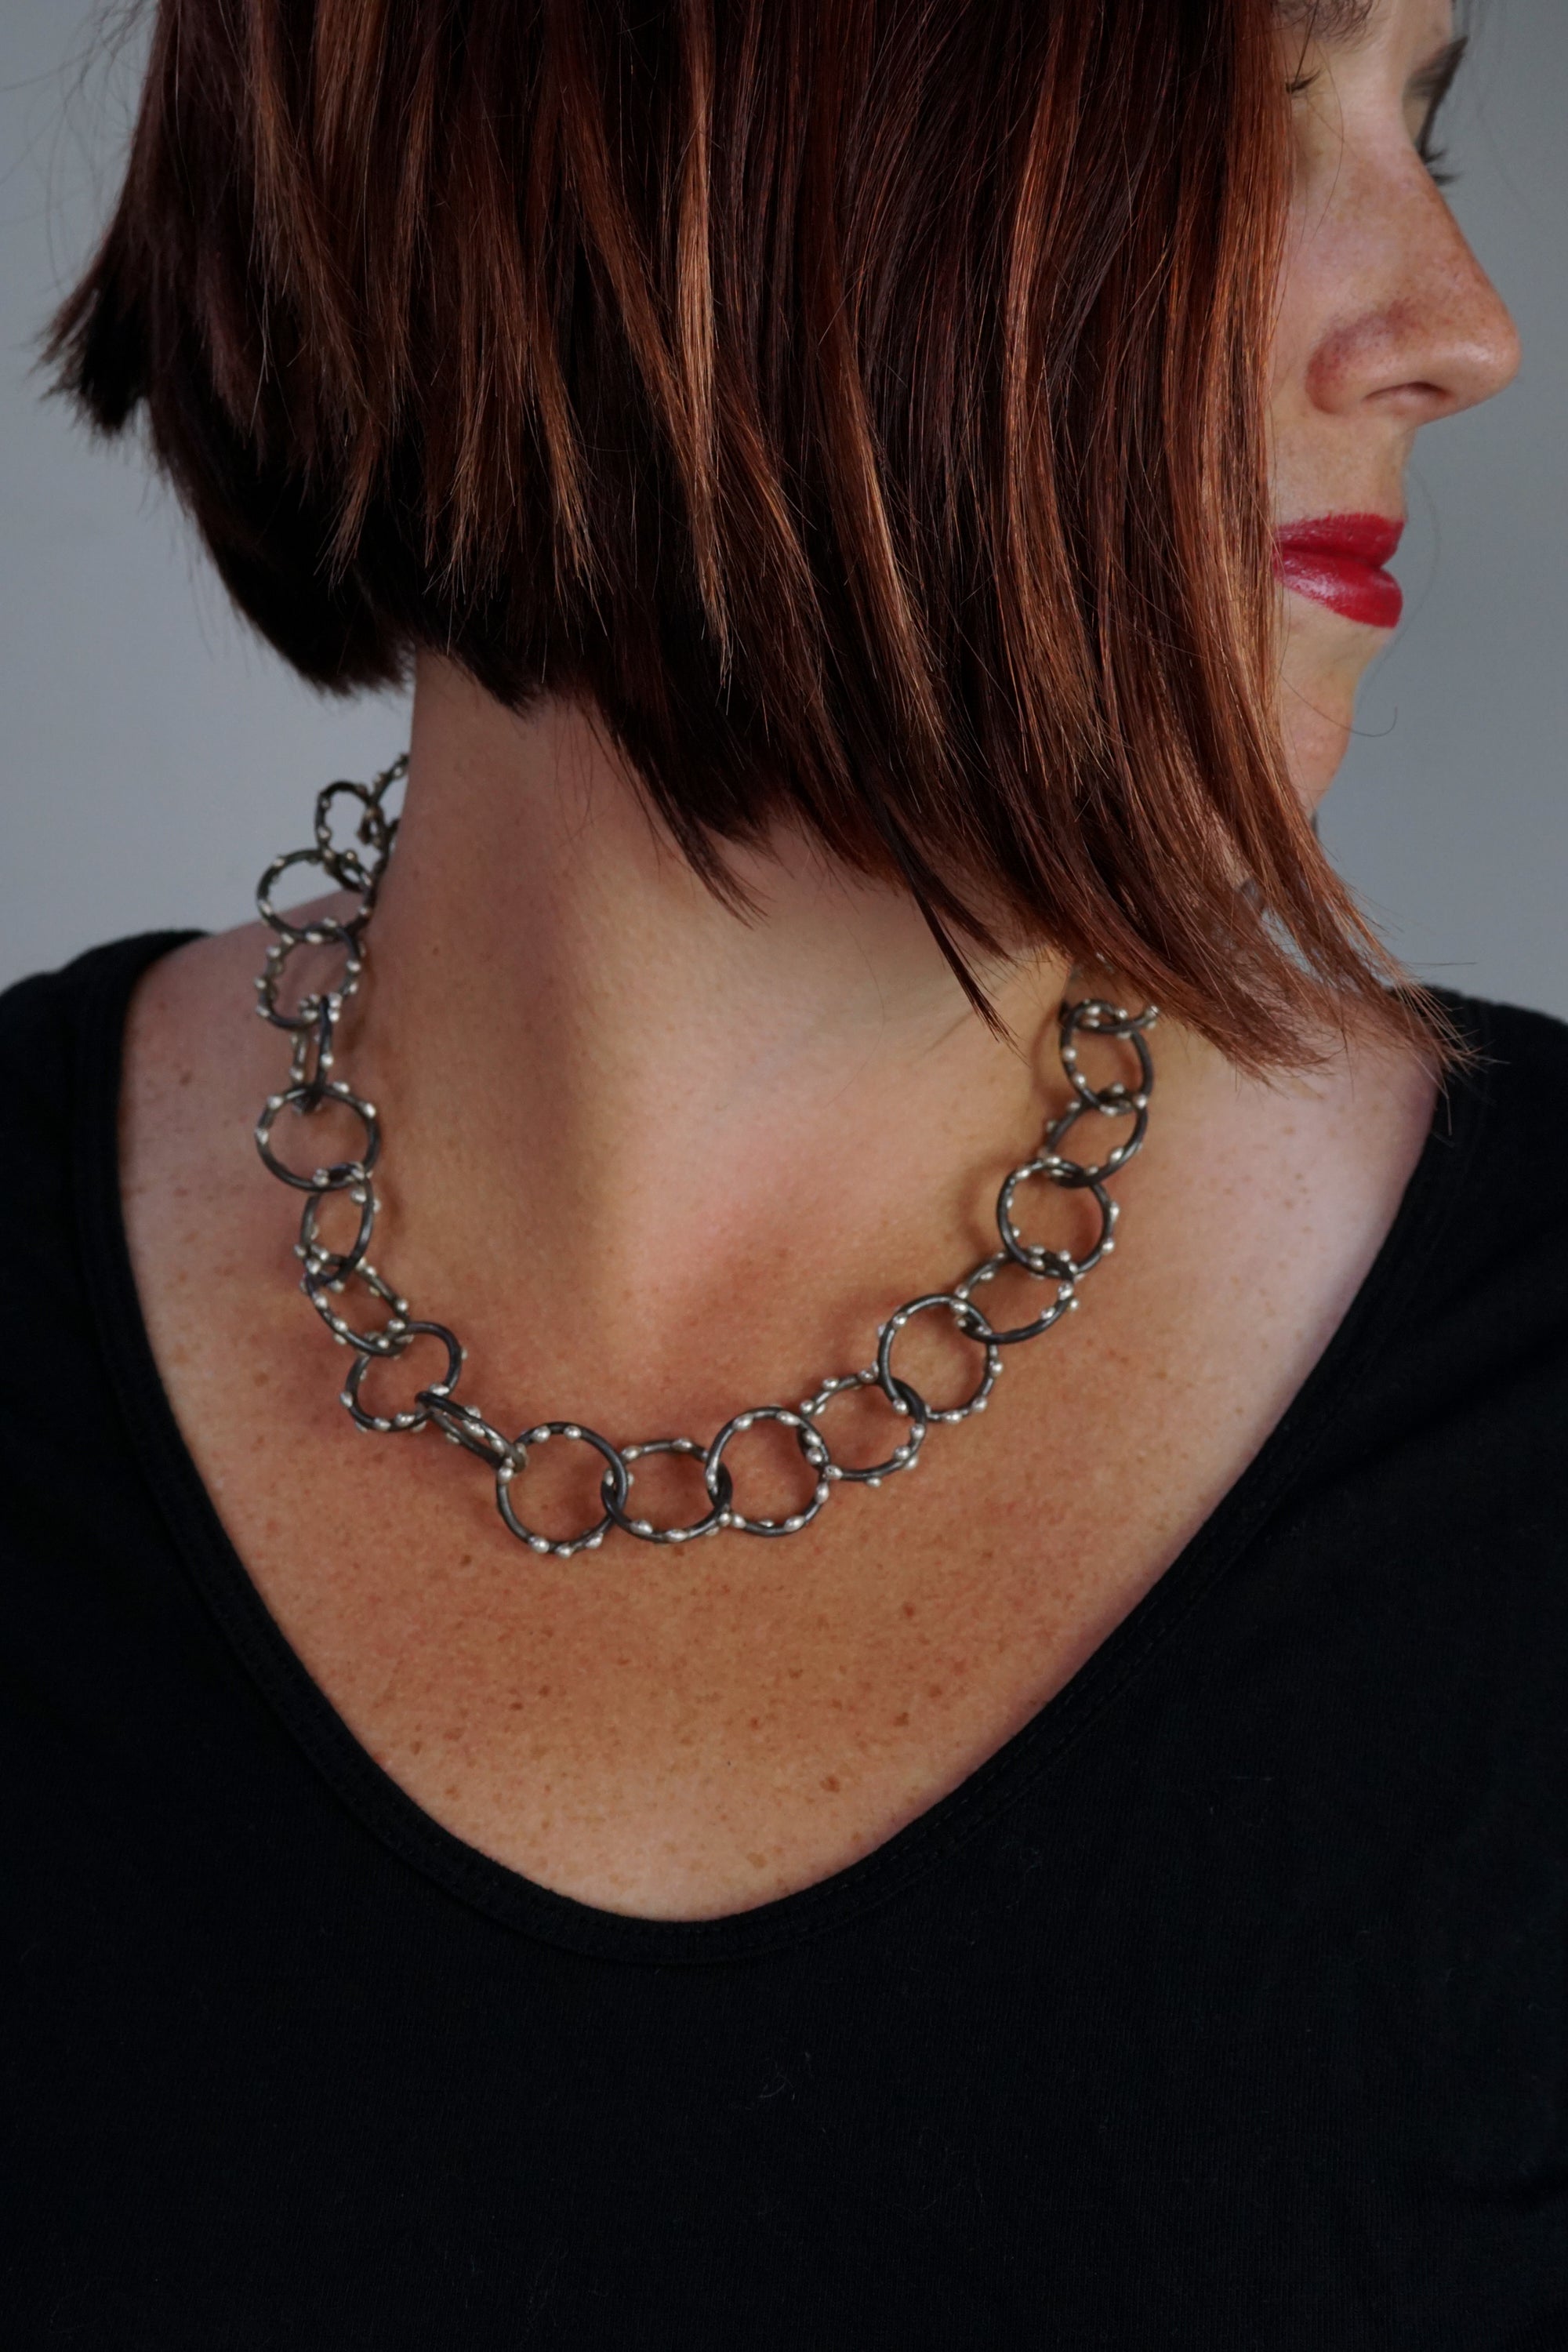 Amaranth Necklace - Silver on Steel